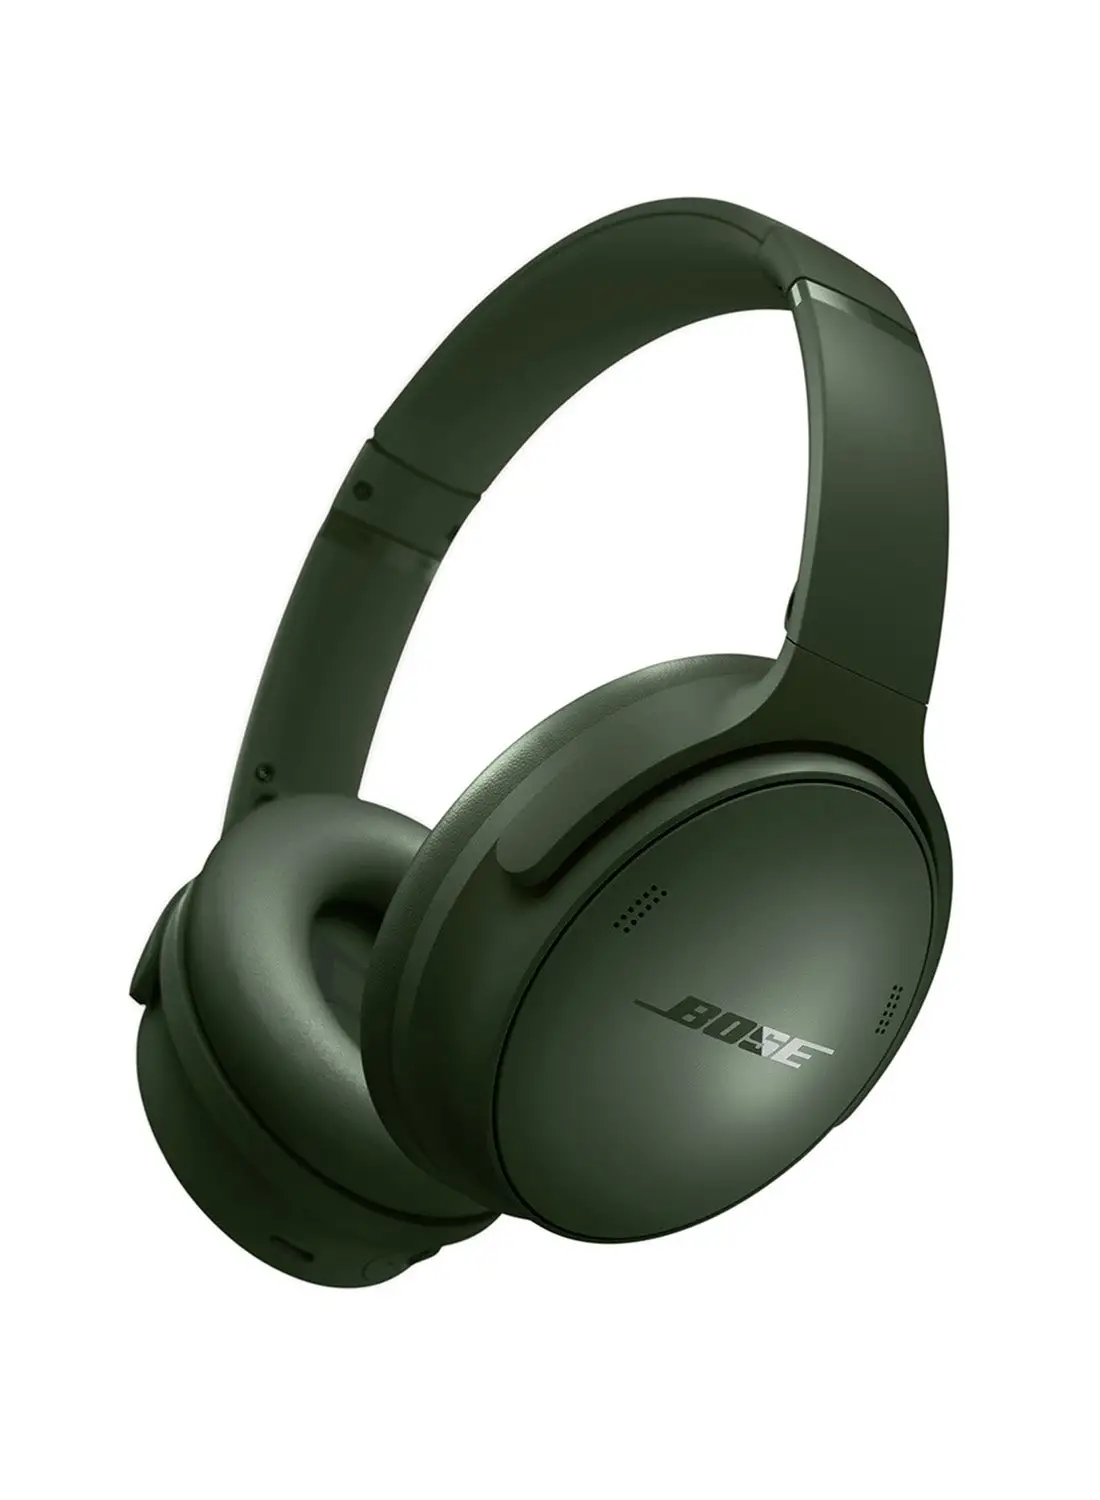 BOSE QuietComfort Wireless Noise Cancelling Headphones Bluetooth Over Ear Headphones with Up To 24 Hours of Battery Life Cypress Green